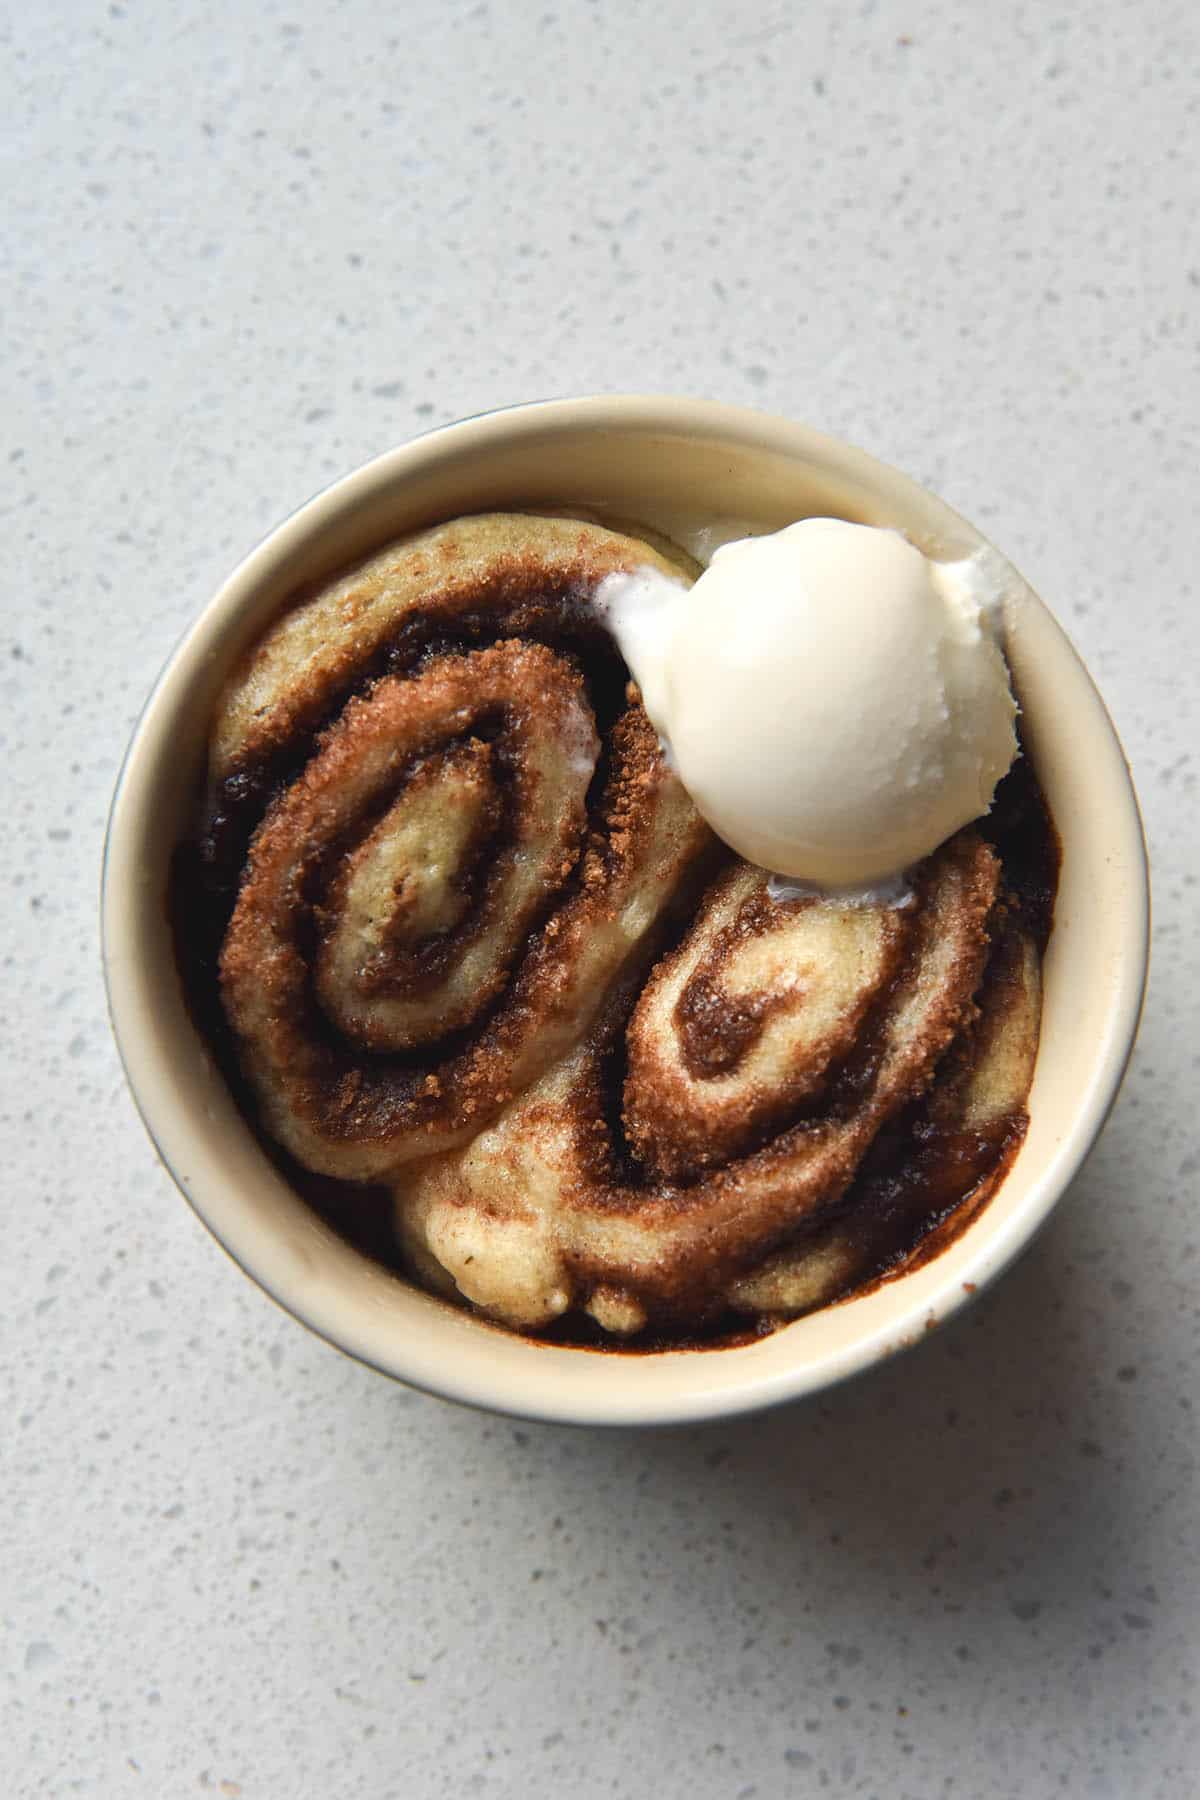 An aerial close up view of a gluten-free vegan microwave cinnamon scroll. The scroll has been cooked in a beige ramekin, which sits atop a white speckled ceramic plate. There are two scrolls snuggled into the dish and are topped with a small scoop of vanilla ice cream